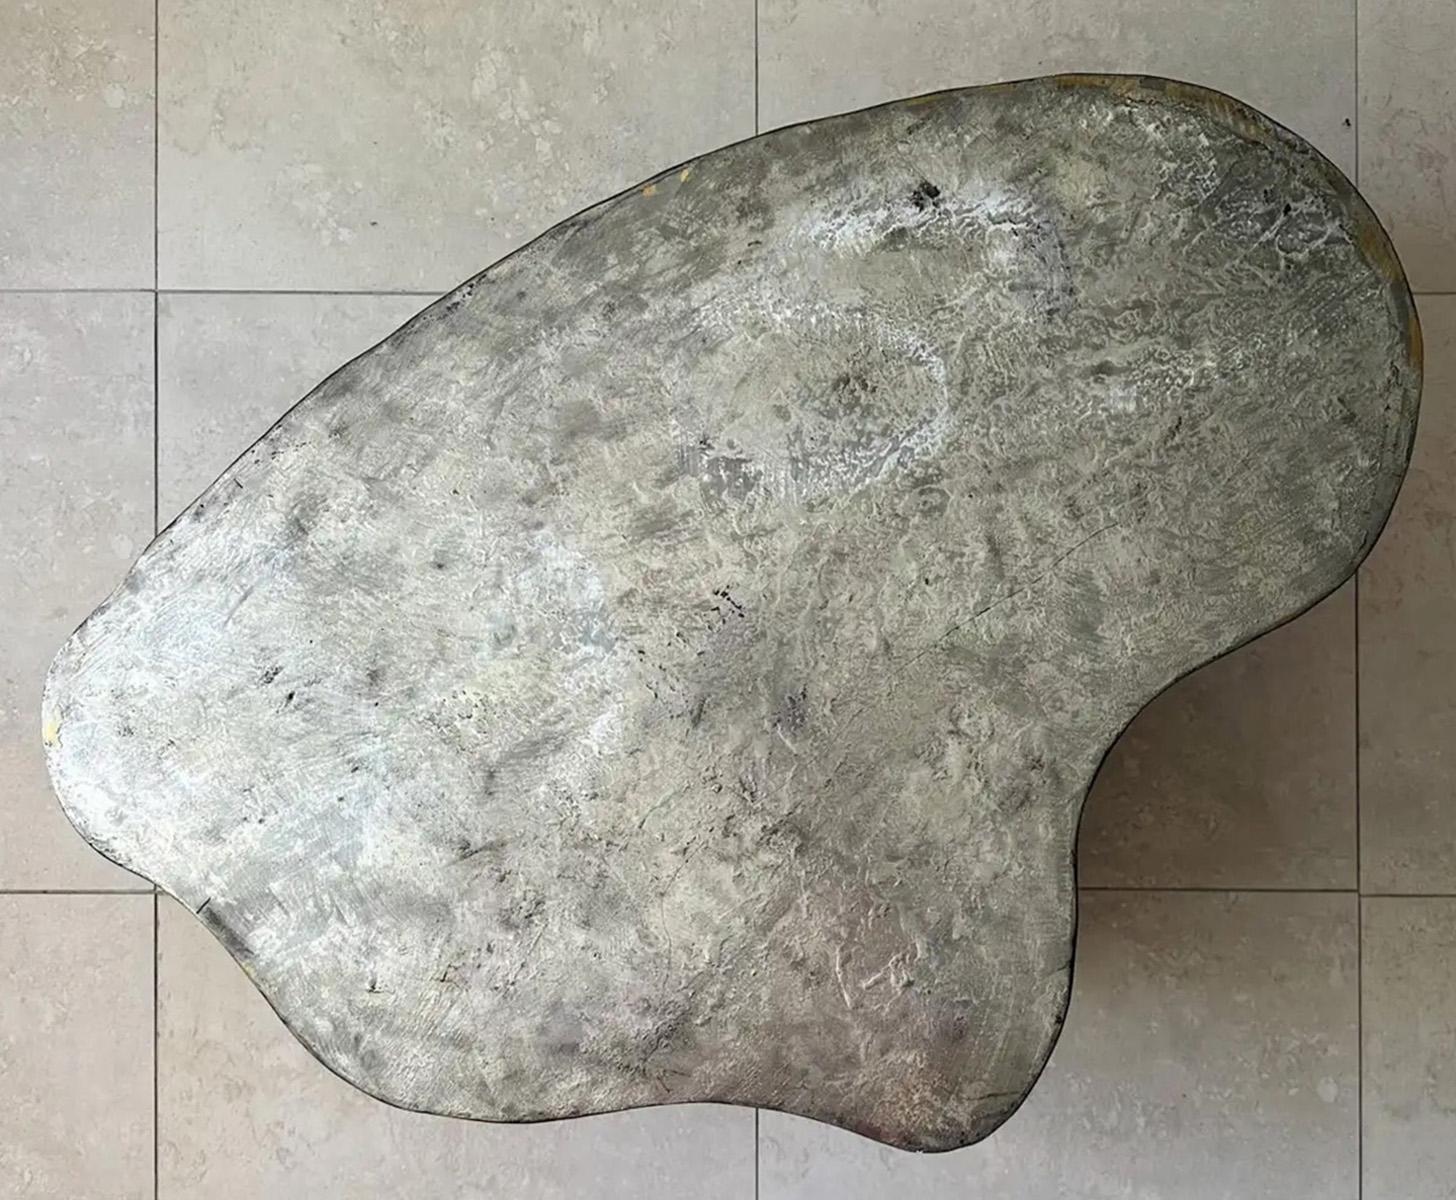 Silas Seandel, American (Born 1937). Mid-Century modern sculptured free form patinated welded bronze coffee table with silvered top. Partial signature on side is slightly worn from age and use. Measures 16